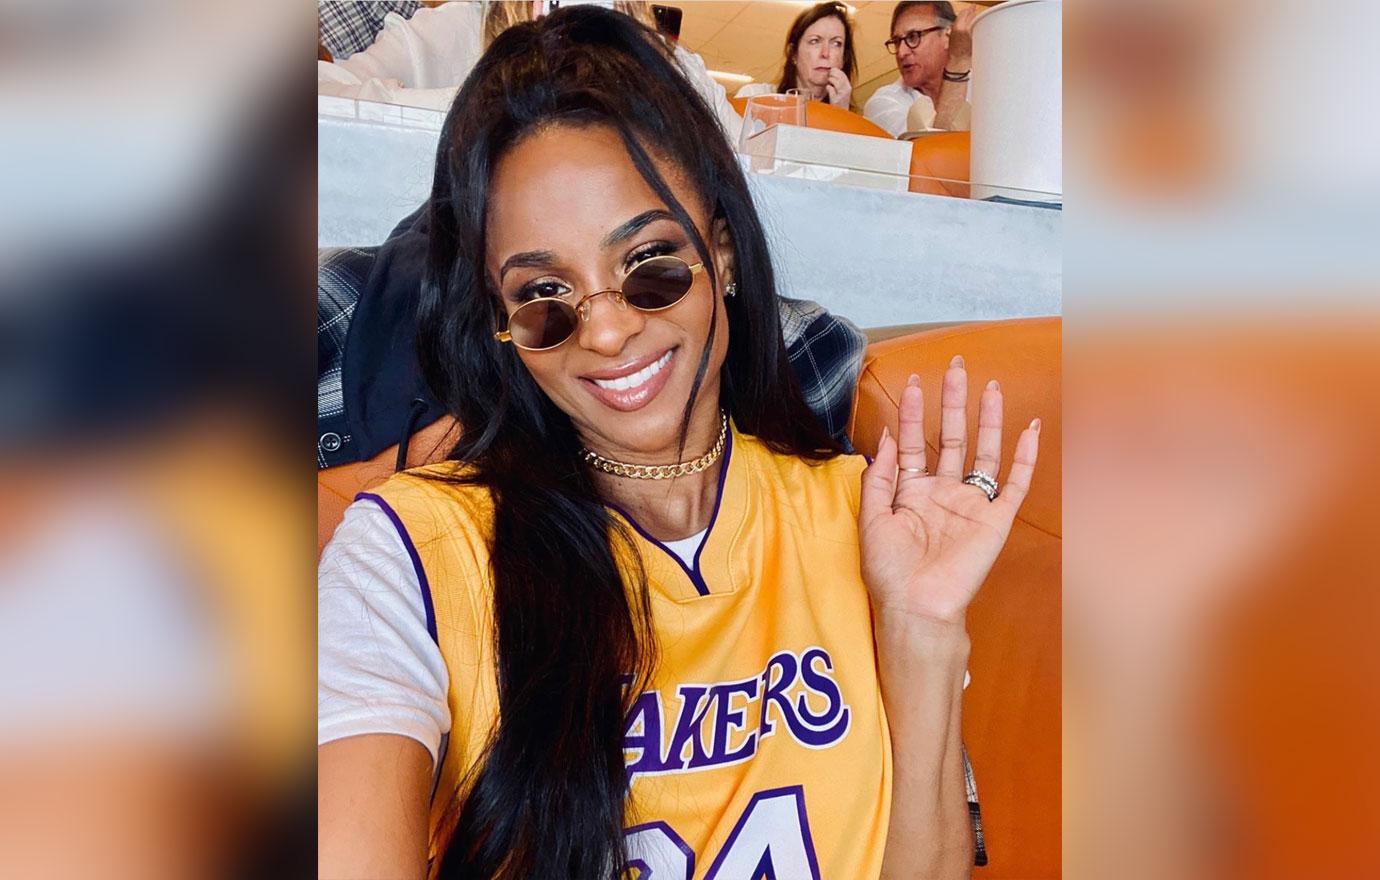 Pregnant Ciara & Russell Wilson Honor Kobe Bryant With Matching